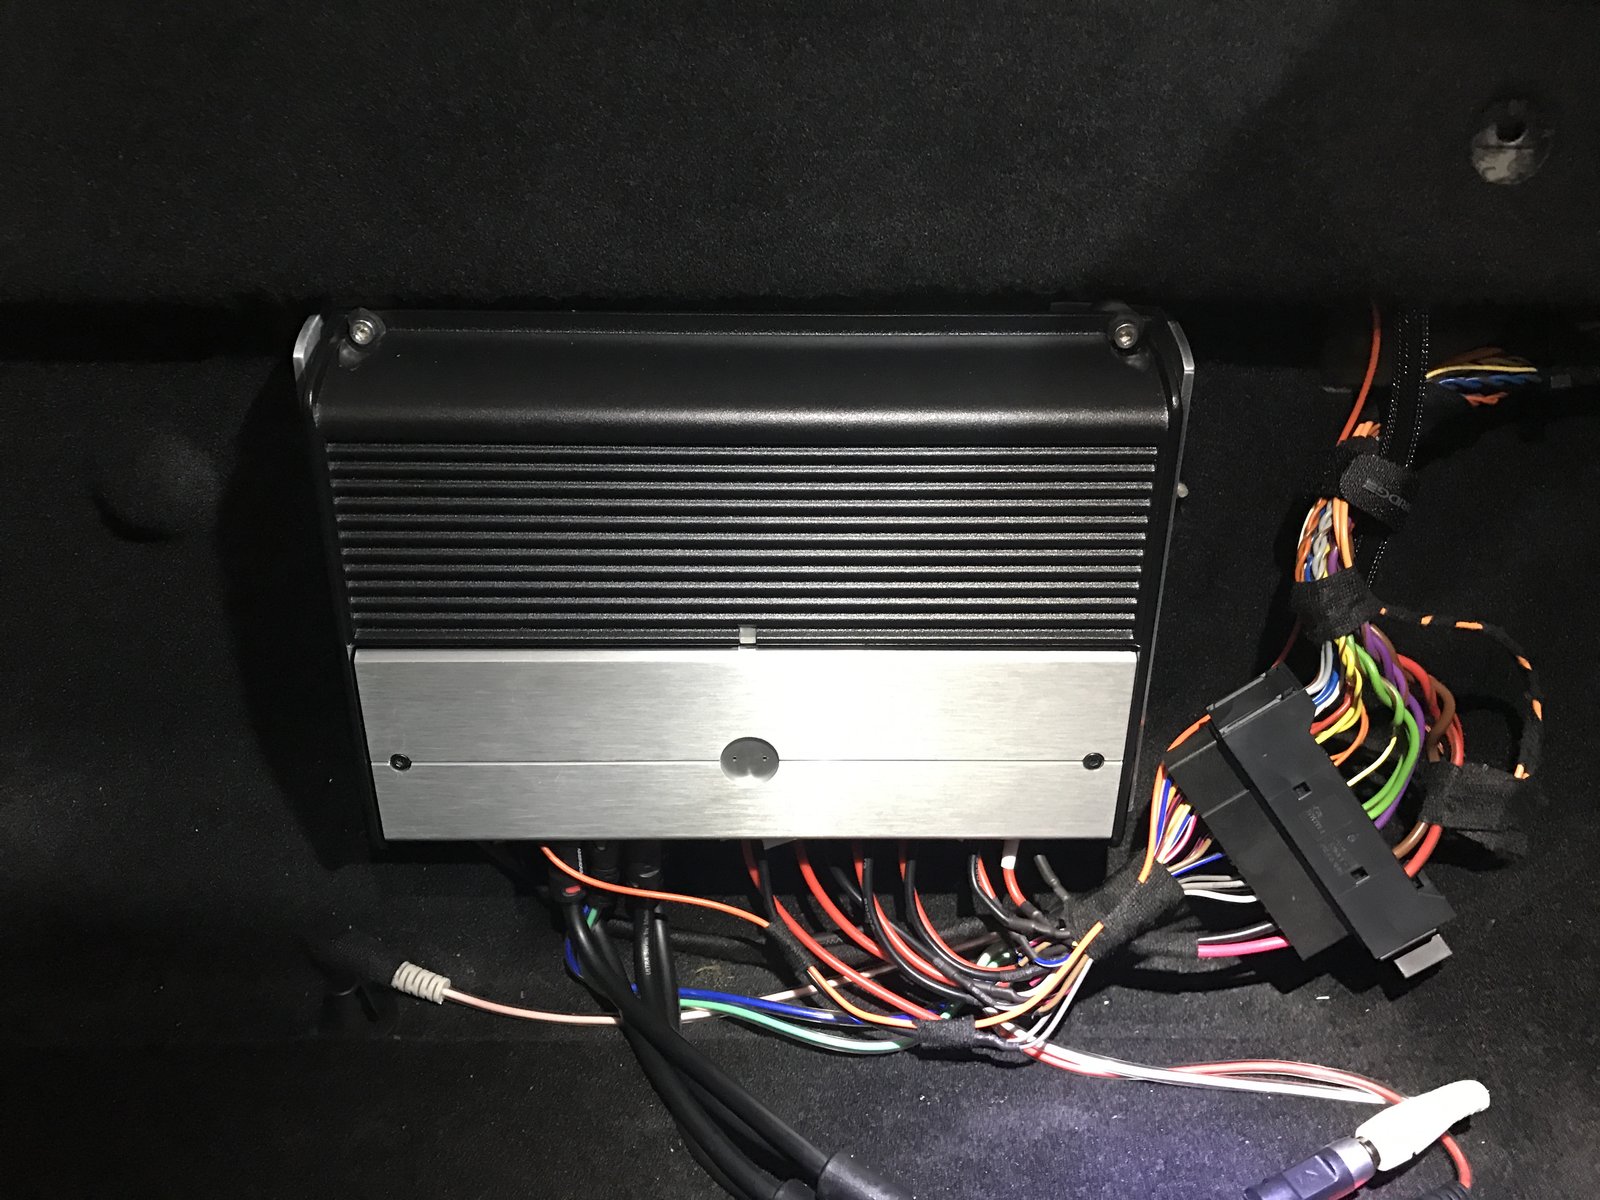 Replaced Bose system and PCM with new amp and head unit [Pics and guide